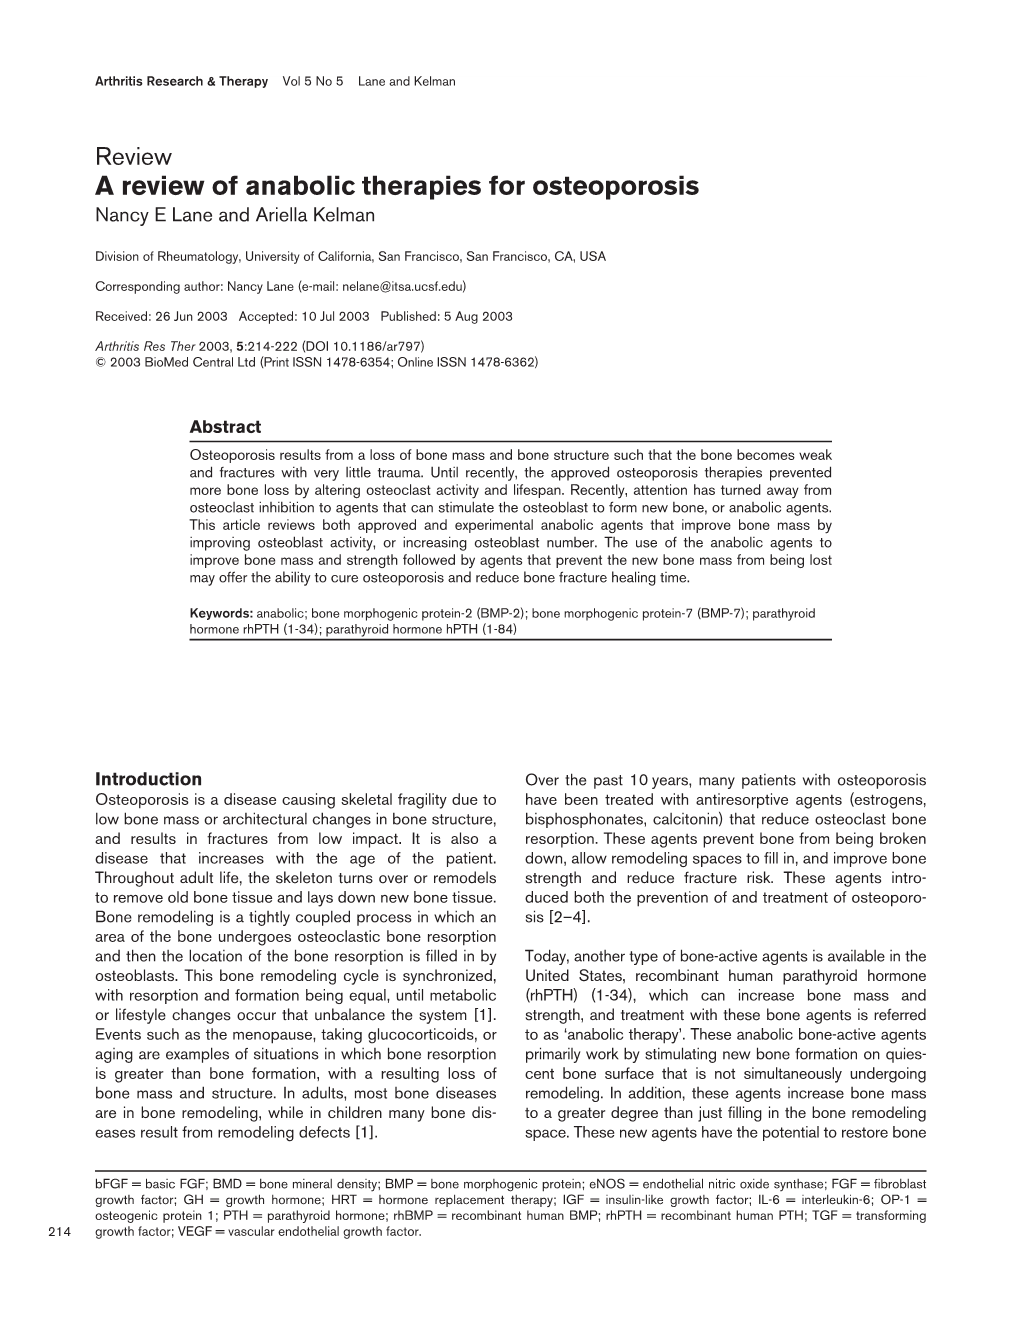 A Review of Anabolic Therapies for Osteoporosis Nancy E Lane and Ariella Kelman